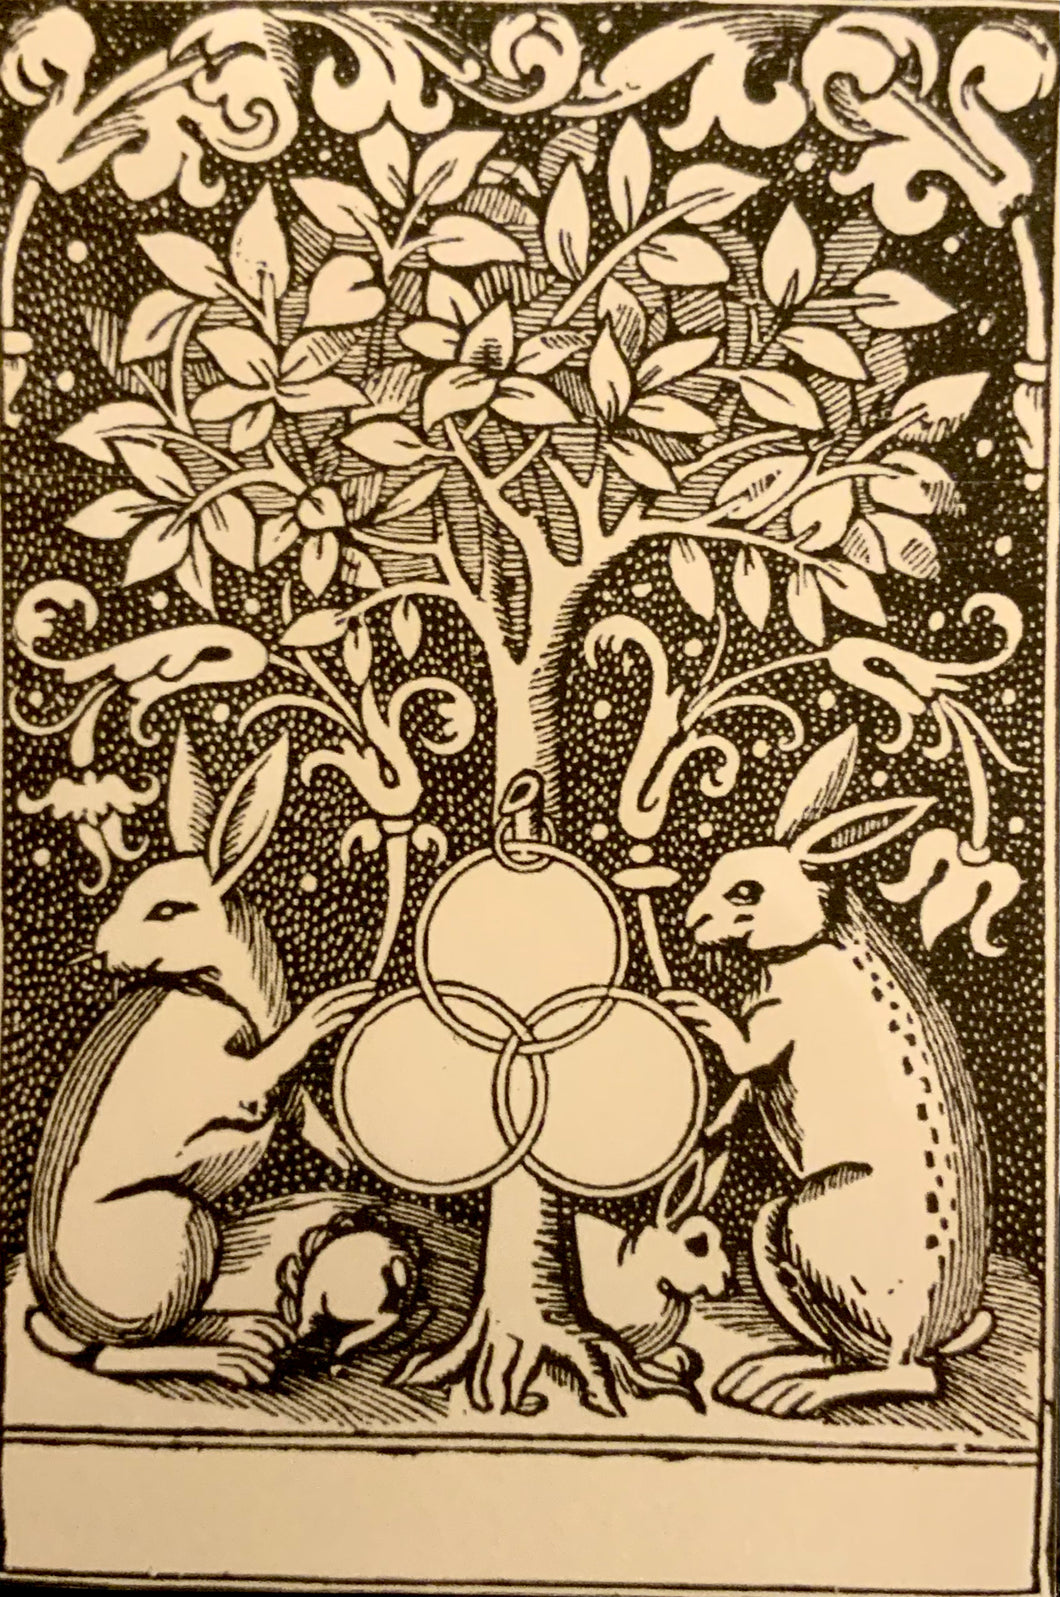 Book Plate - Rabbits